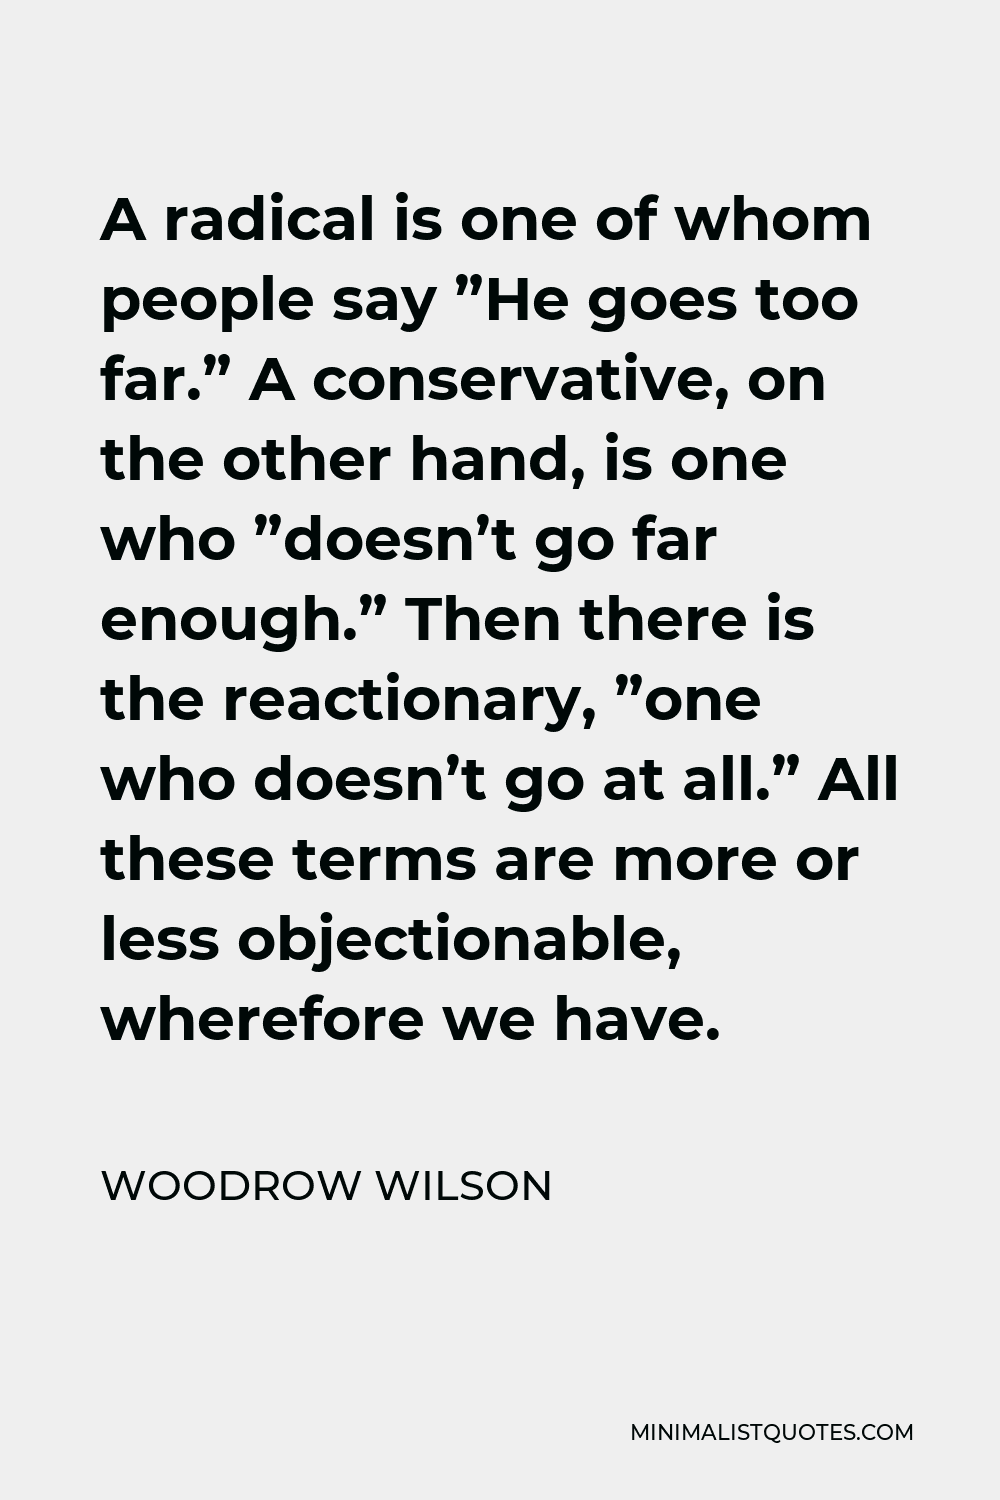 Woodrow Wilson Quote - A radical is one of whom people say ”He goes too far.” A conservative, on the other hand, is one who ”doesn’t go far enough.” Then there is the reactionary, ”one who doesn’t go at all.” All these terms are more or less objectionable, wherefore we have.